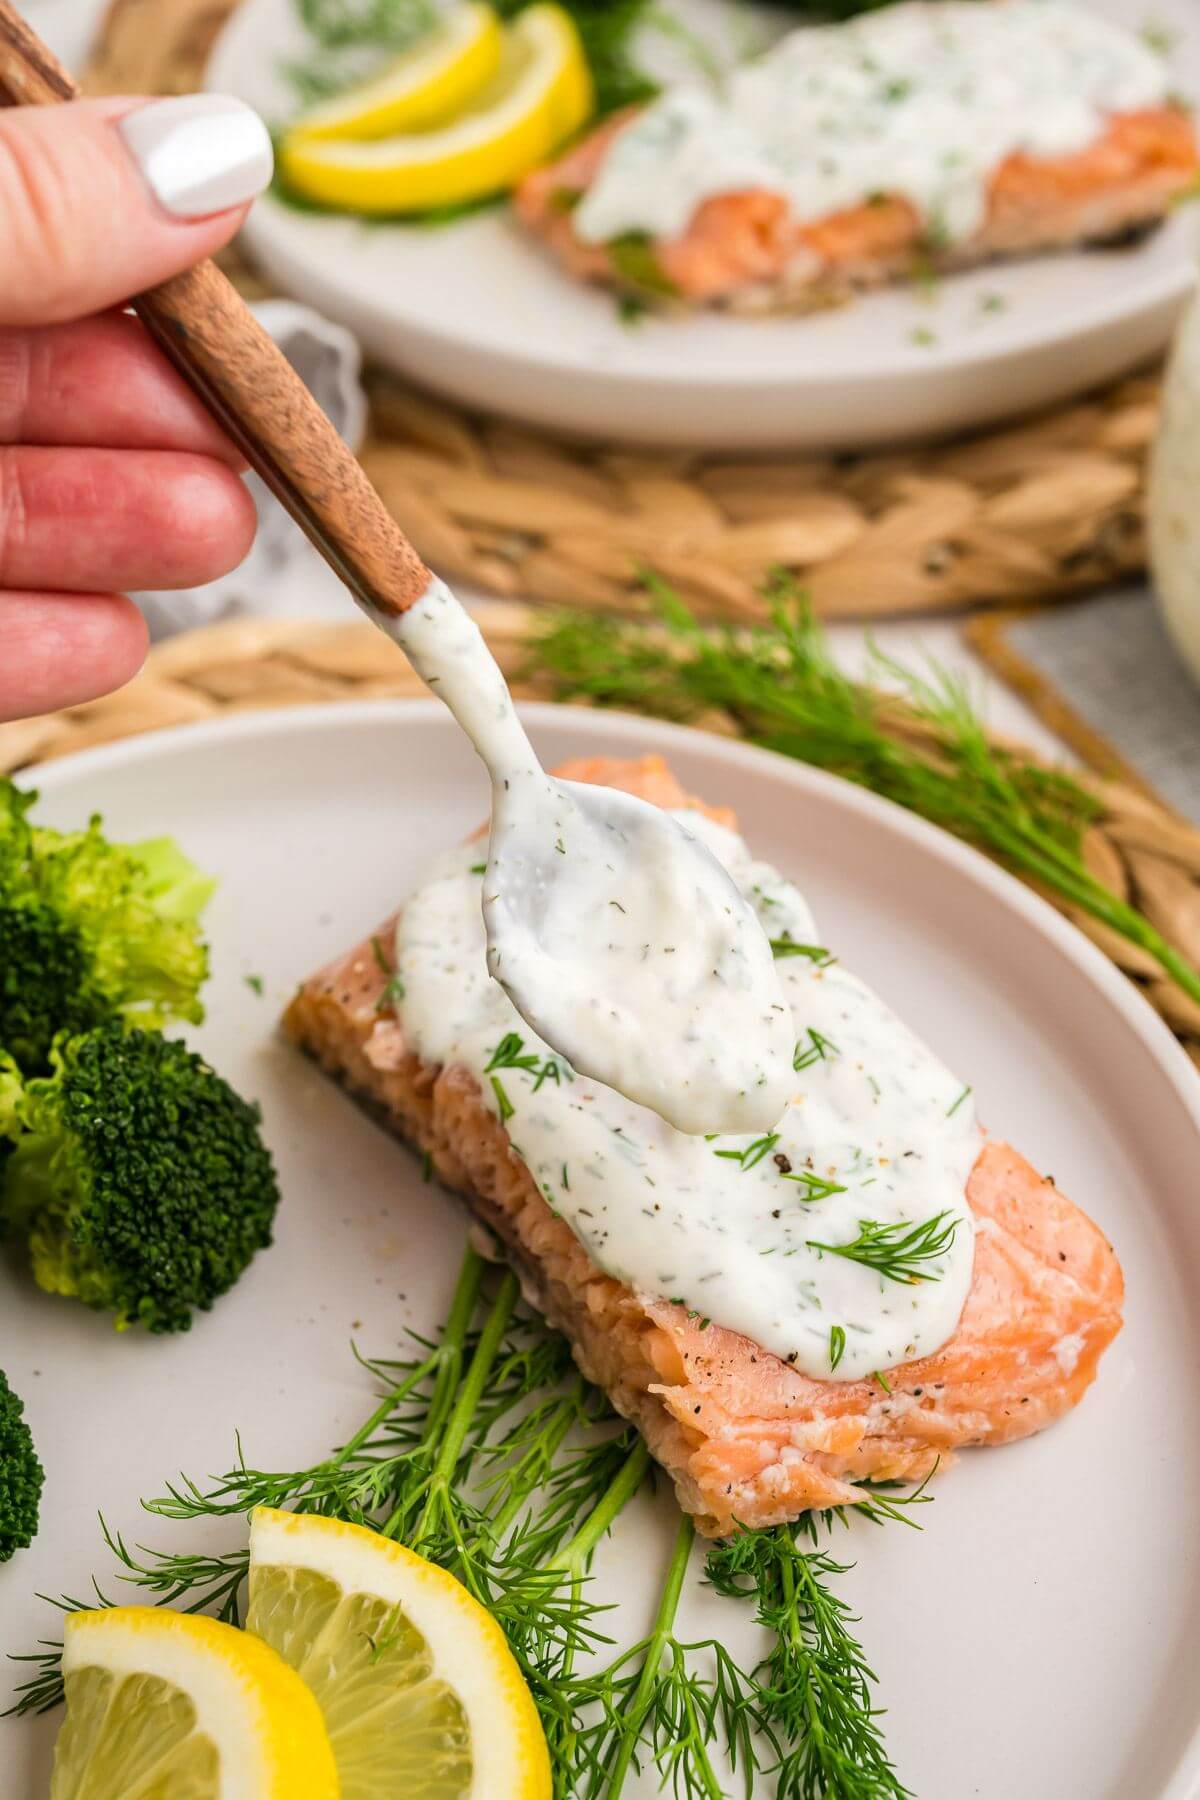 A hand uses a spoon to dollop white sauce on top of salmon.